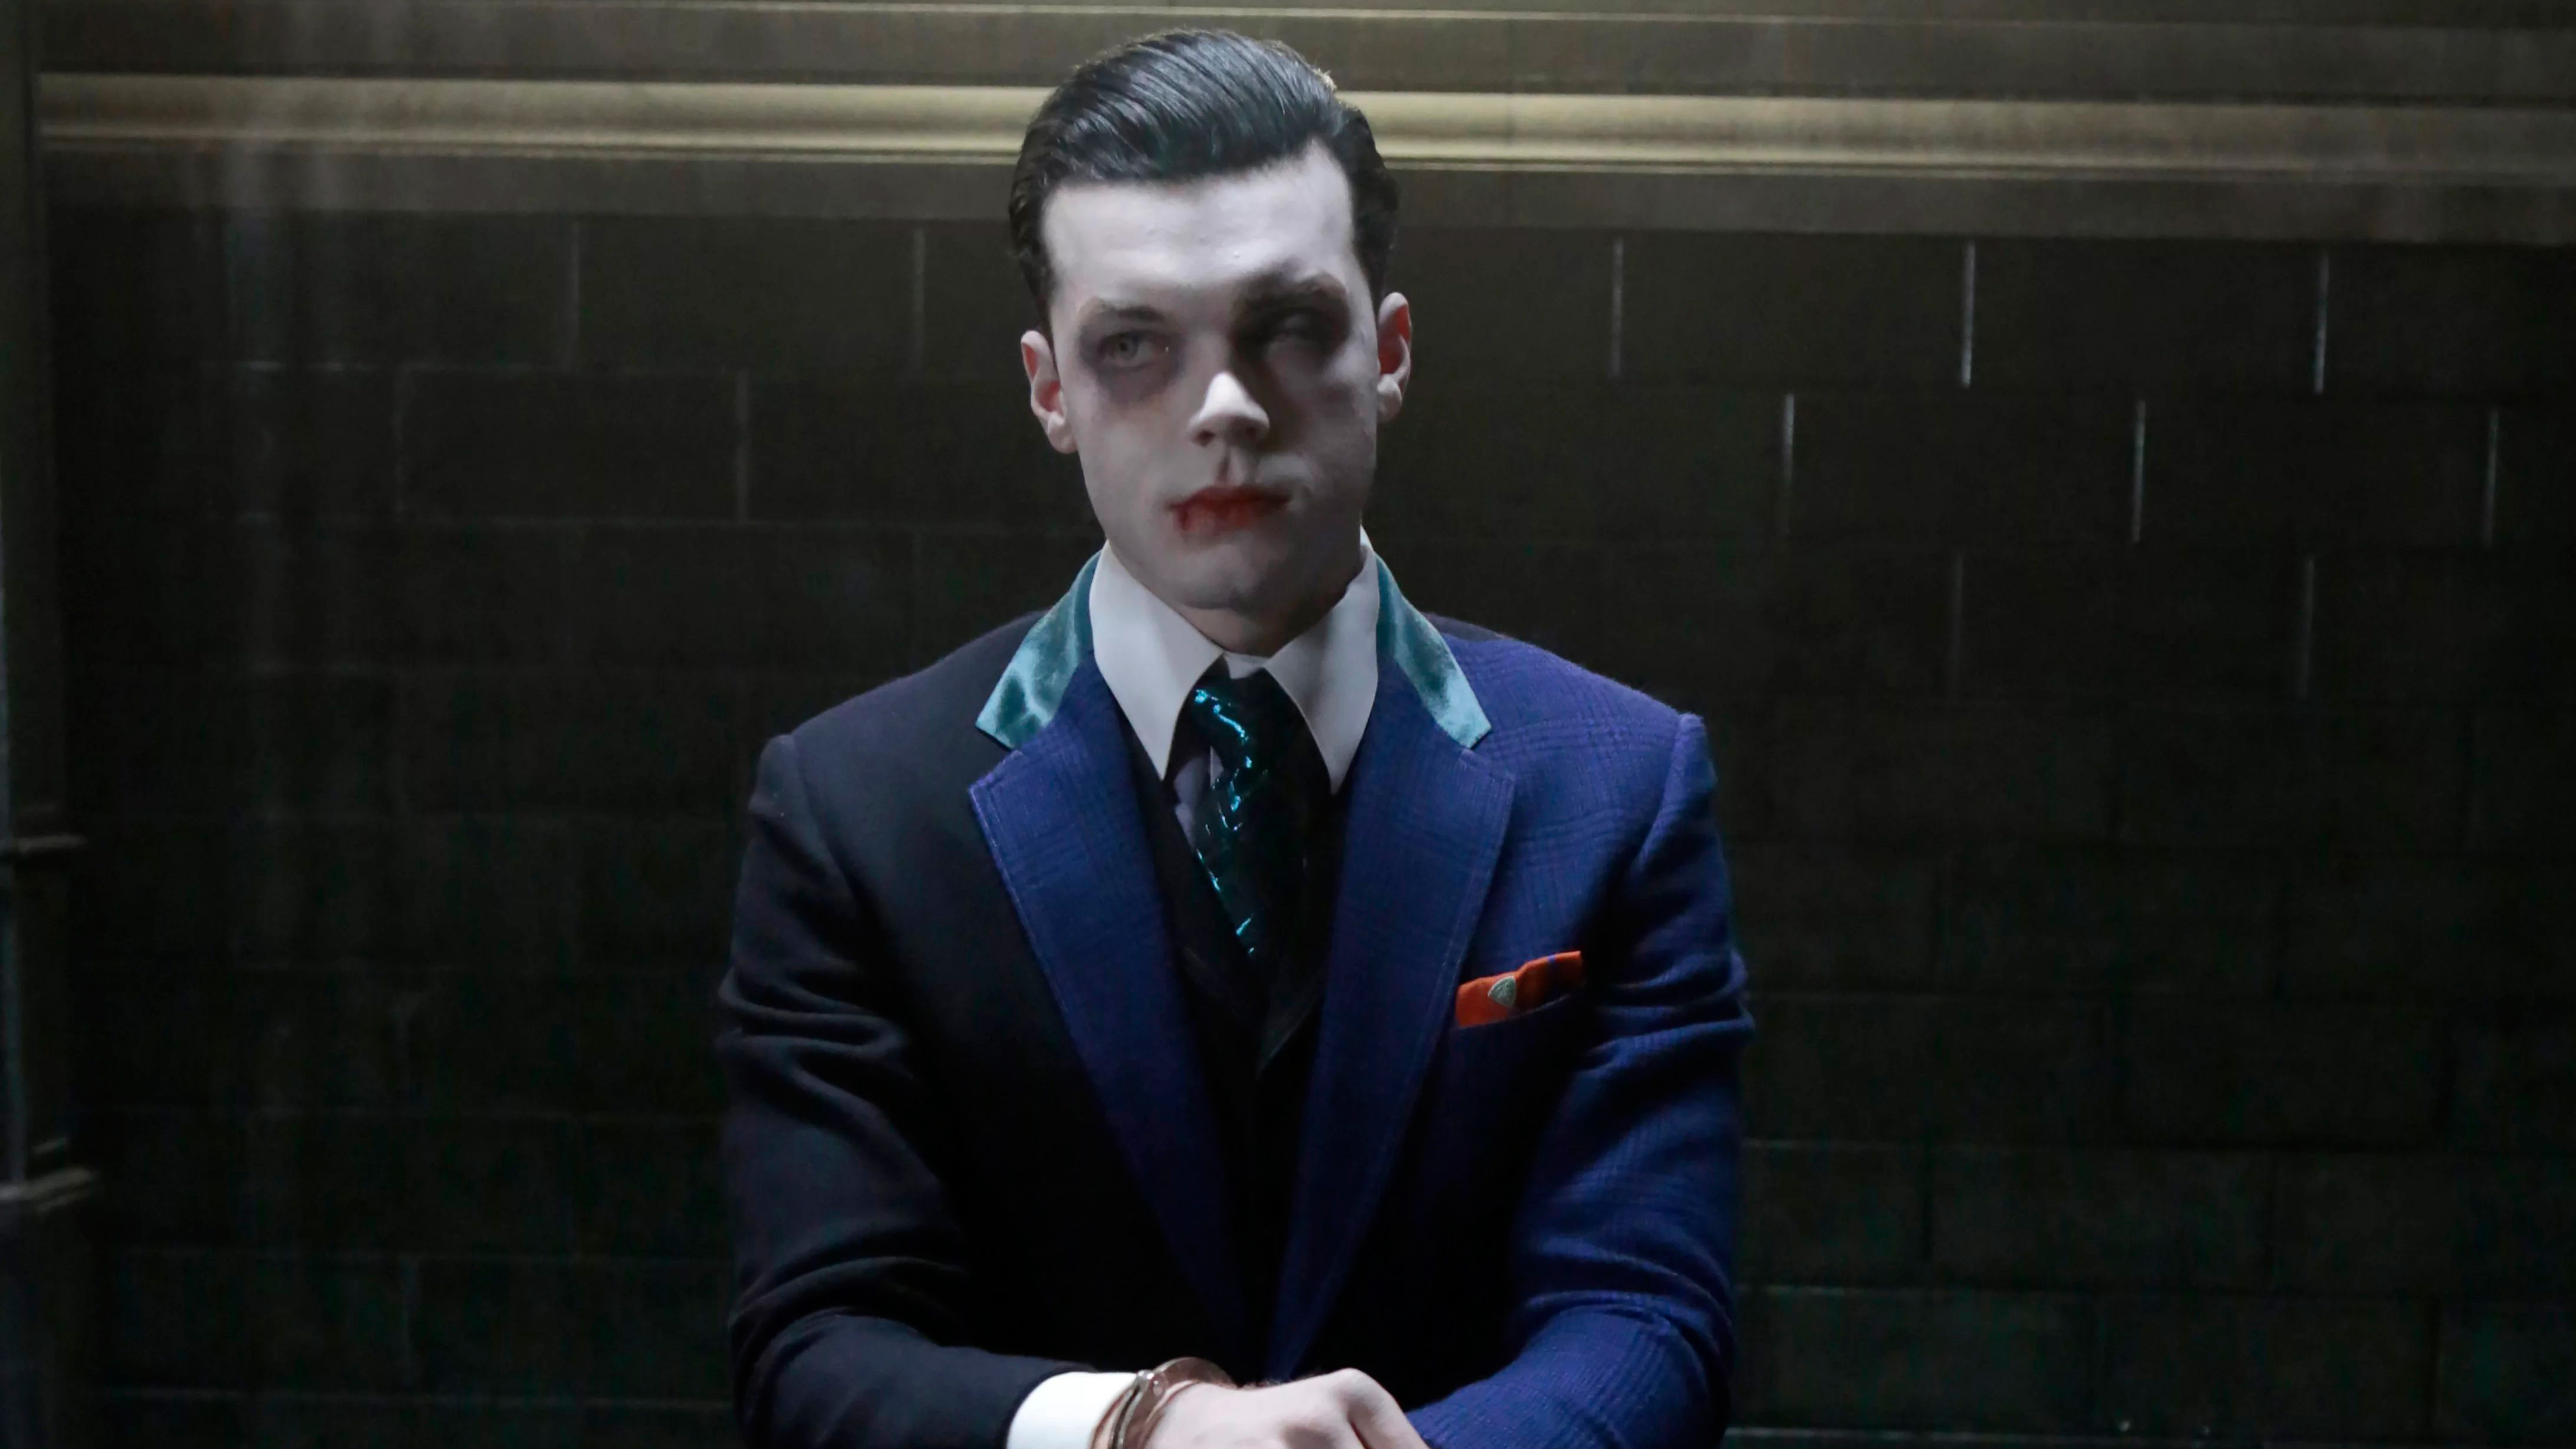 Cameron Monaghan As Joker In Gotham Tv Show, HD Tv Shows, 4k Wallpapers